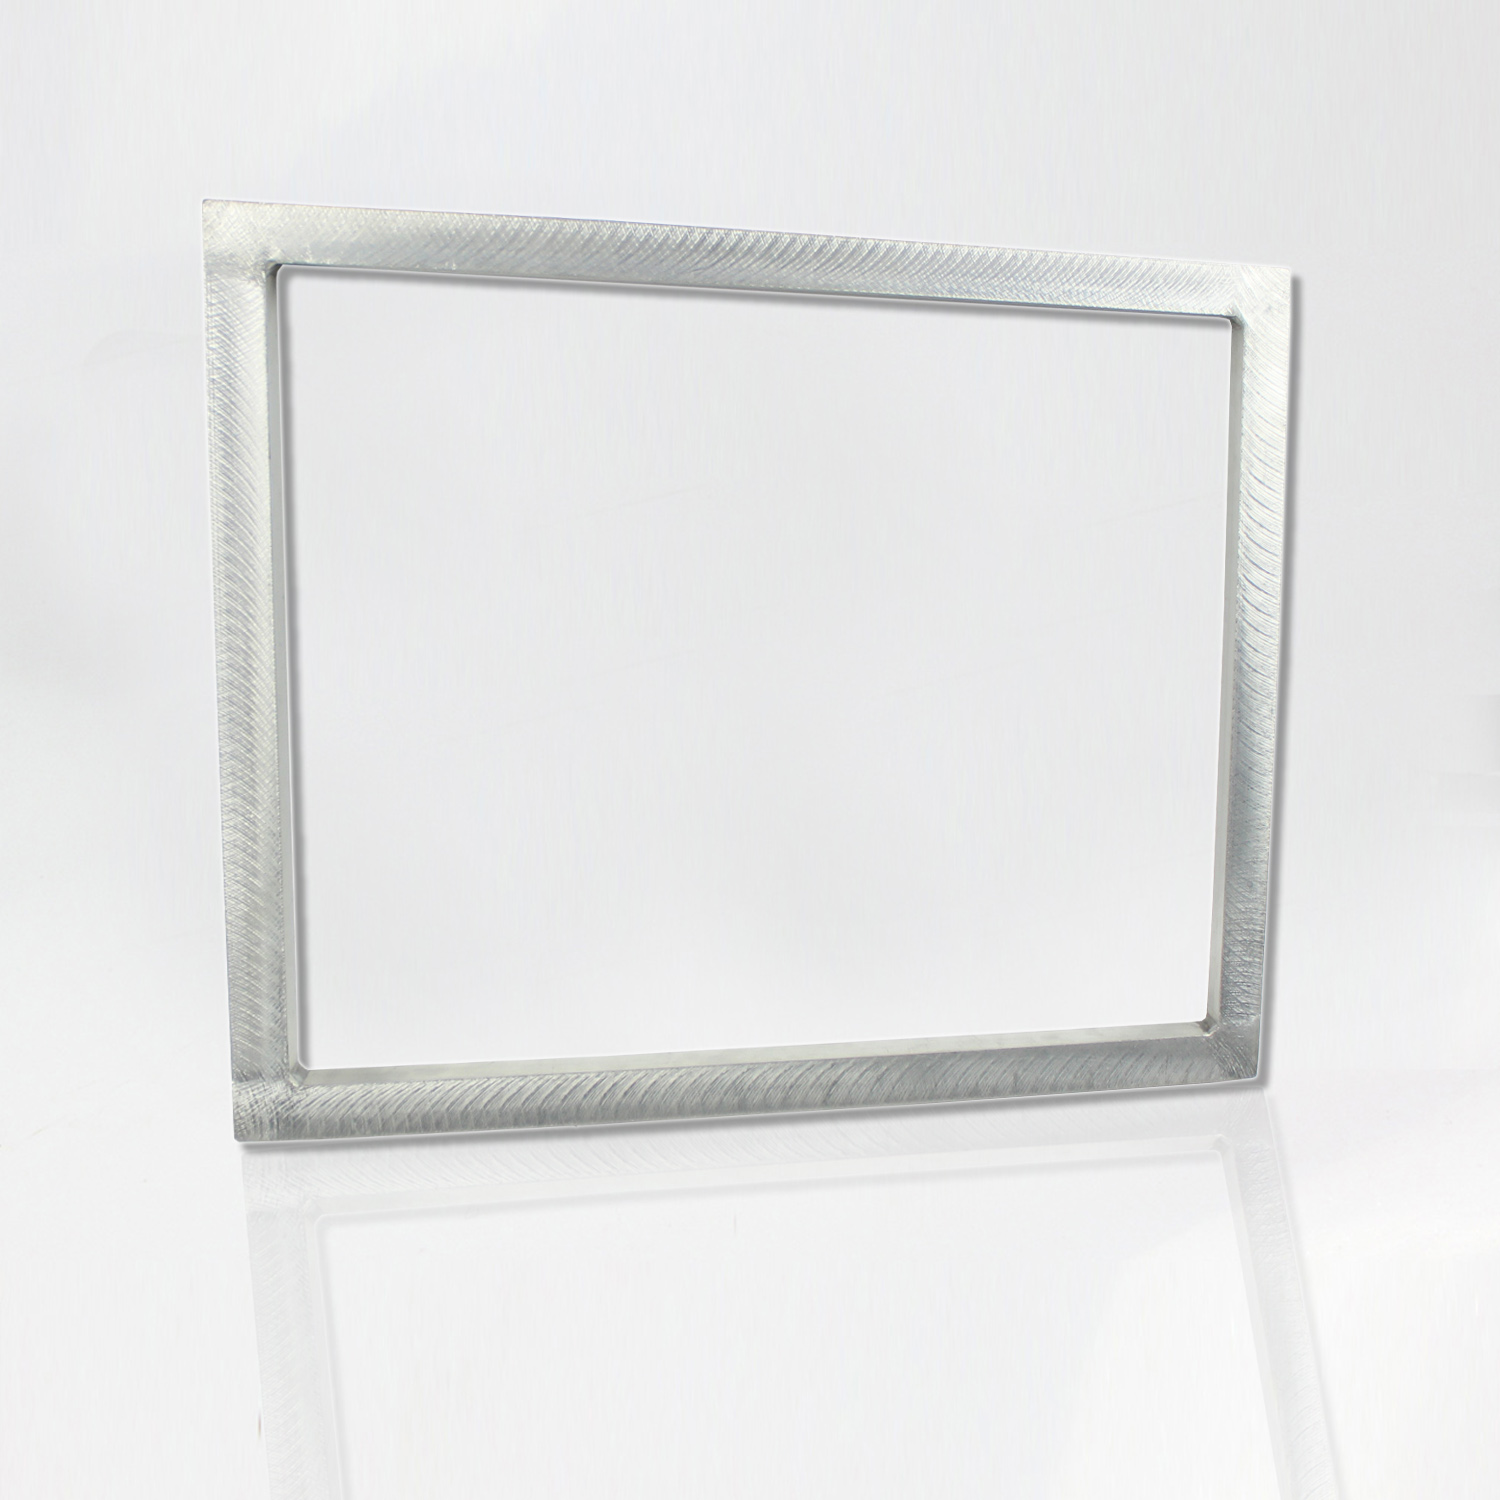 Aluminum bare frame 9”x 20”(frame only) Featured Image